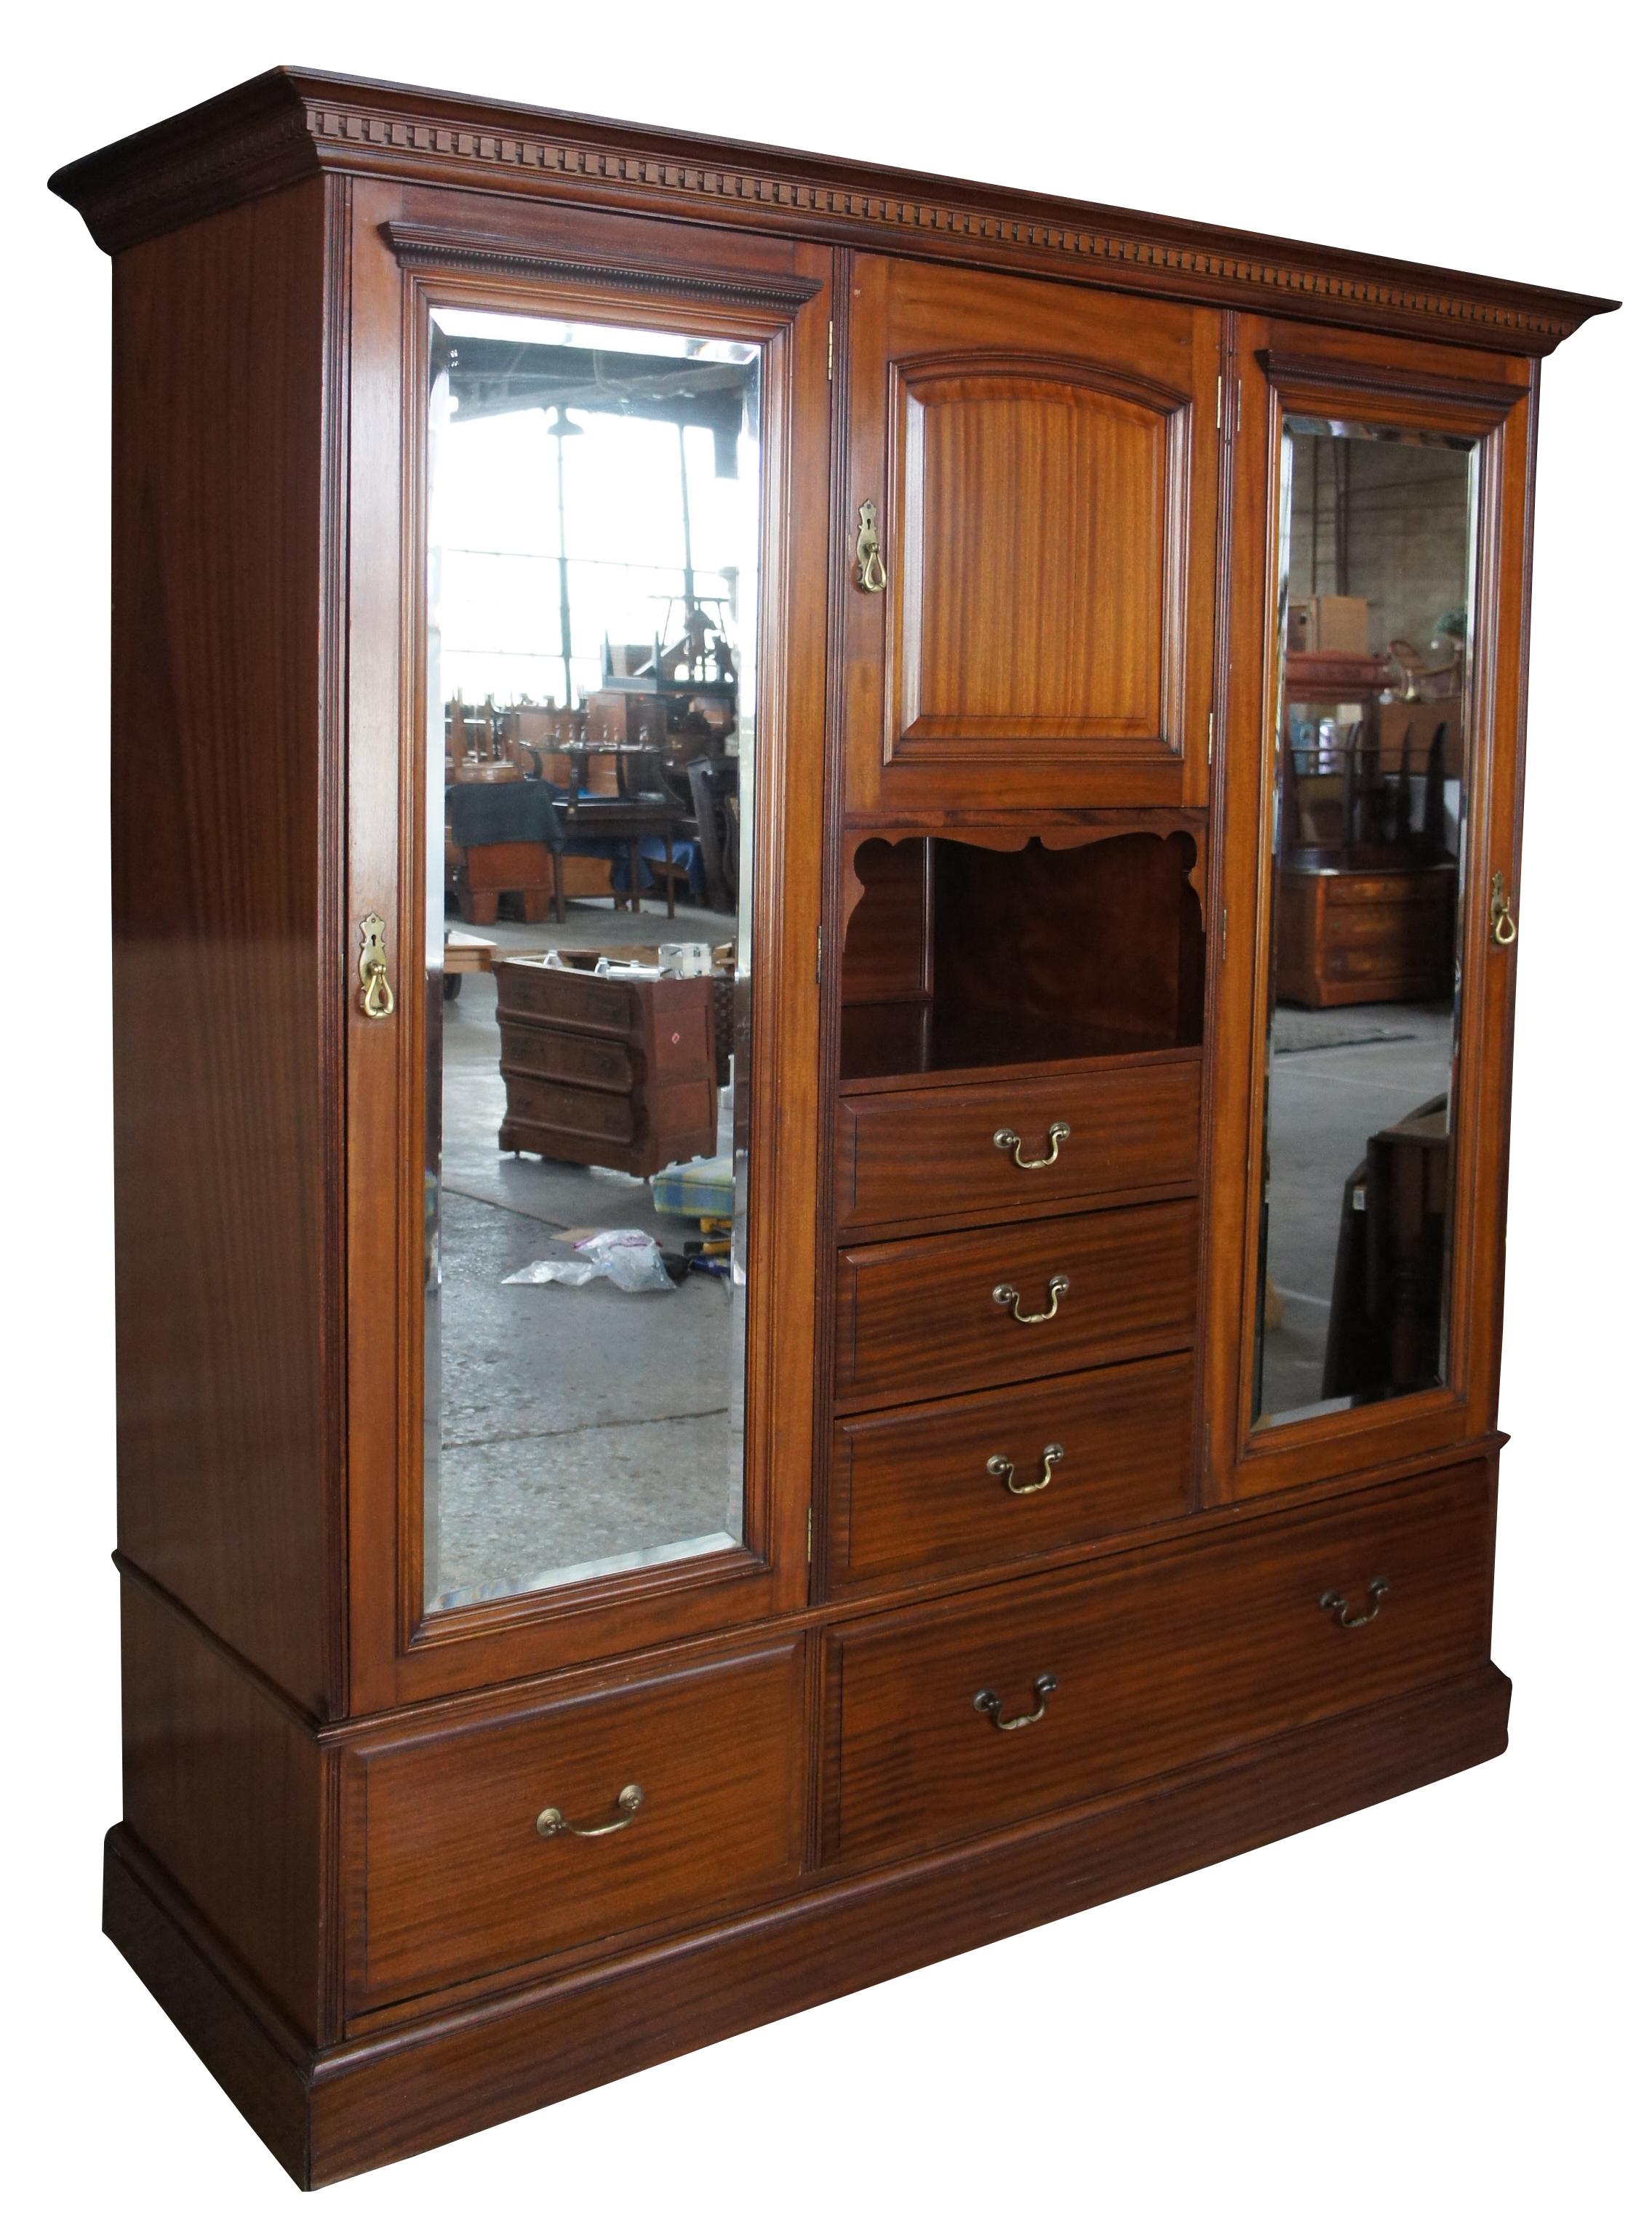 Antique English Edwardian mahogany chifferobe wardrobe closet clothing armoire

Early 20th century mahogany chifforobe. Traditional style with two outer mirrored hanging closets. Includes four drawers, and upper cubby. Doors open via unique latch